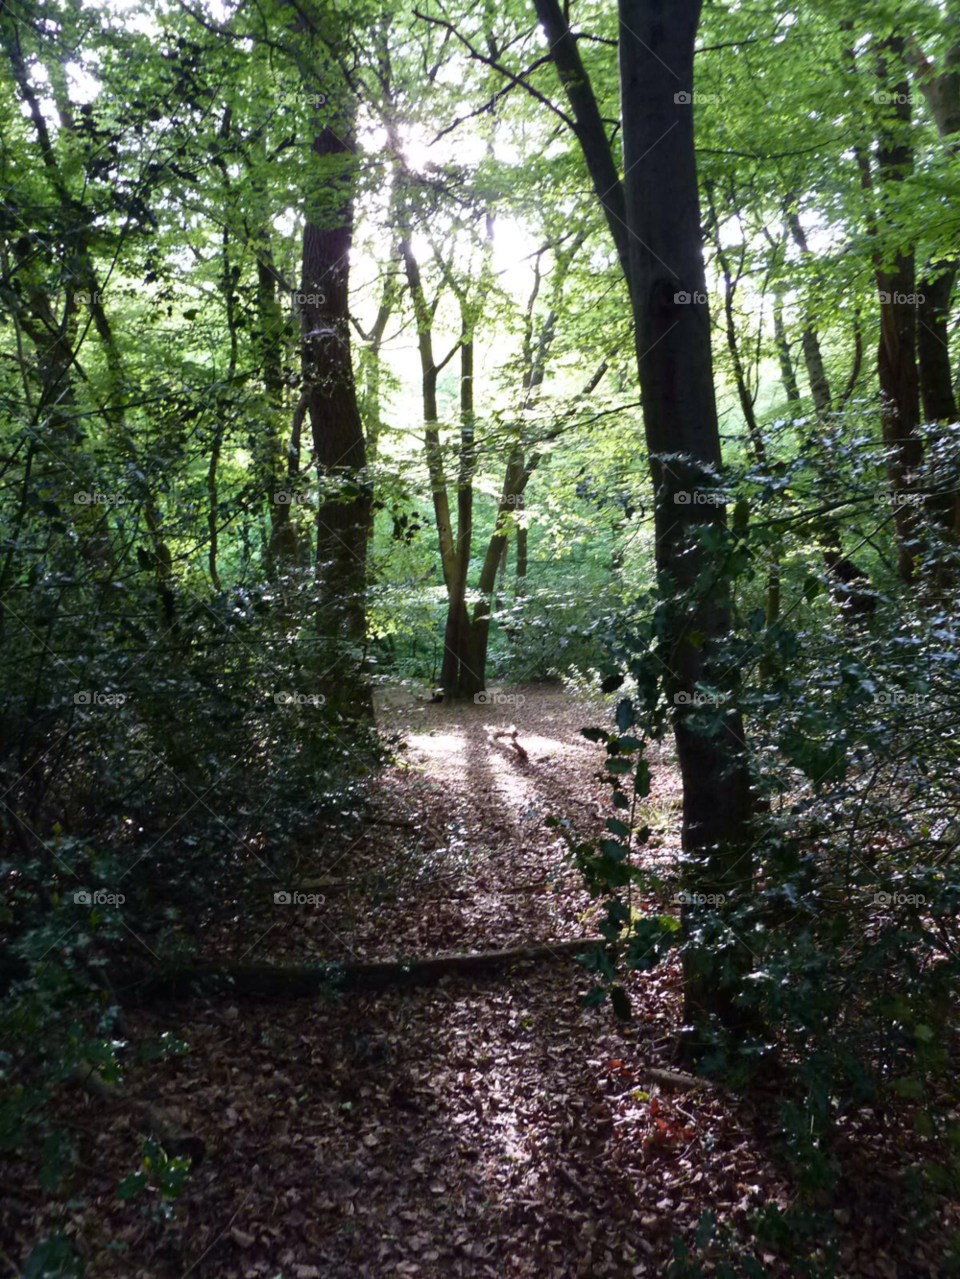 morning walk magical forest epping forest uk by jorussell888